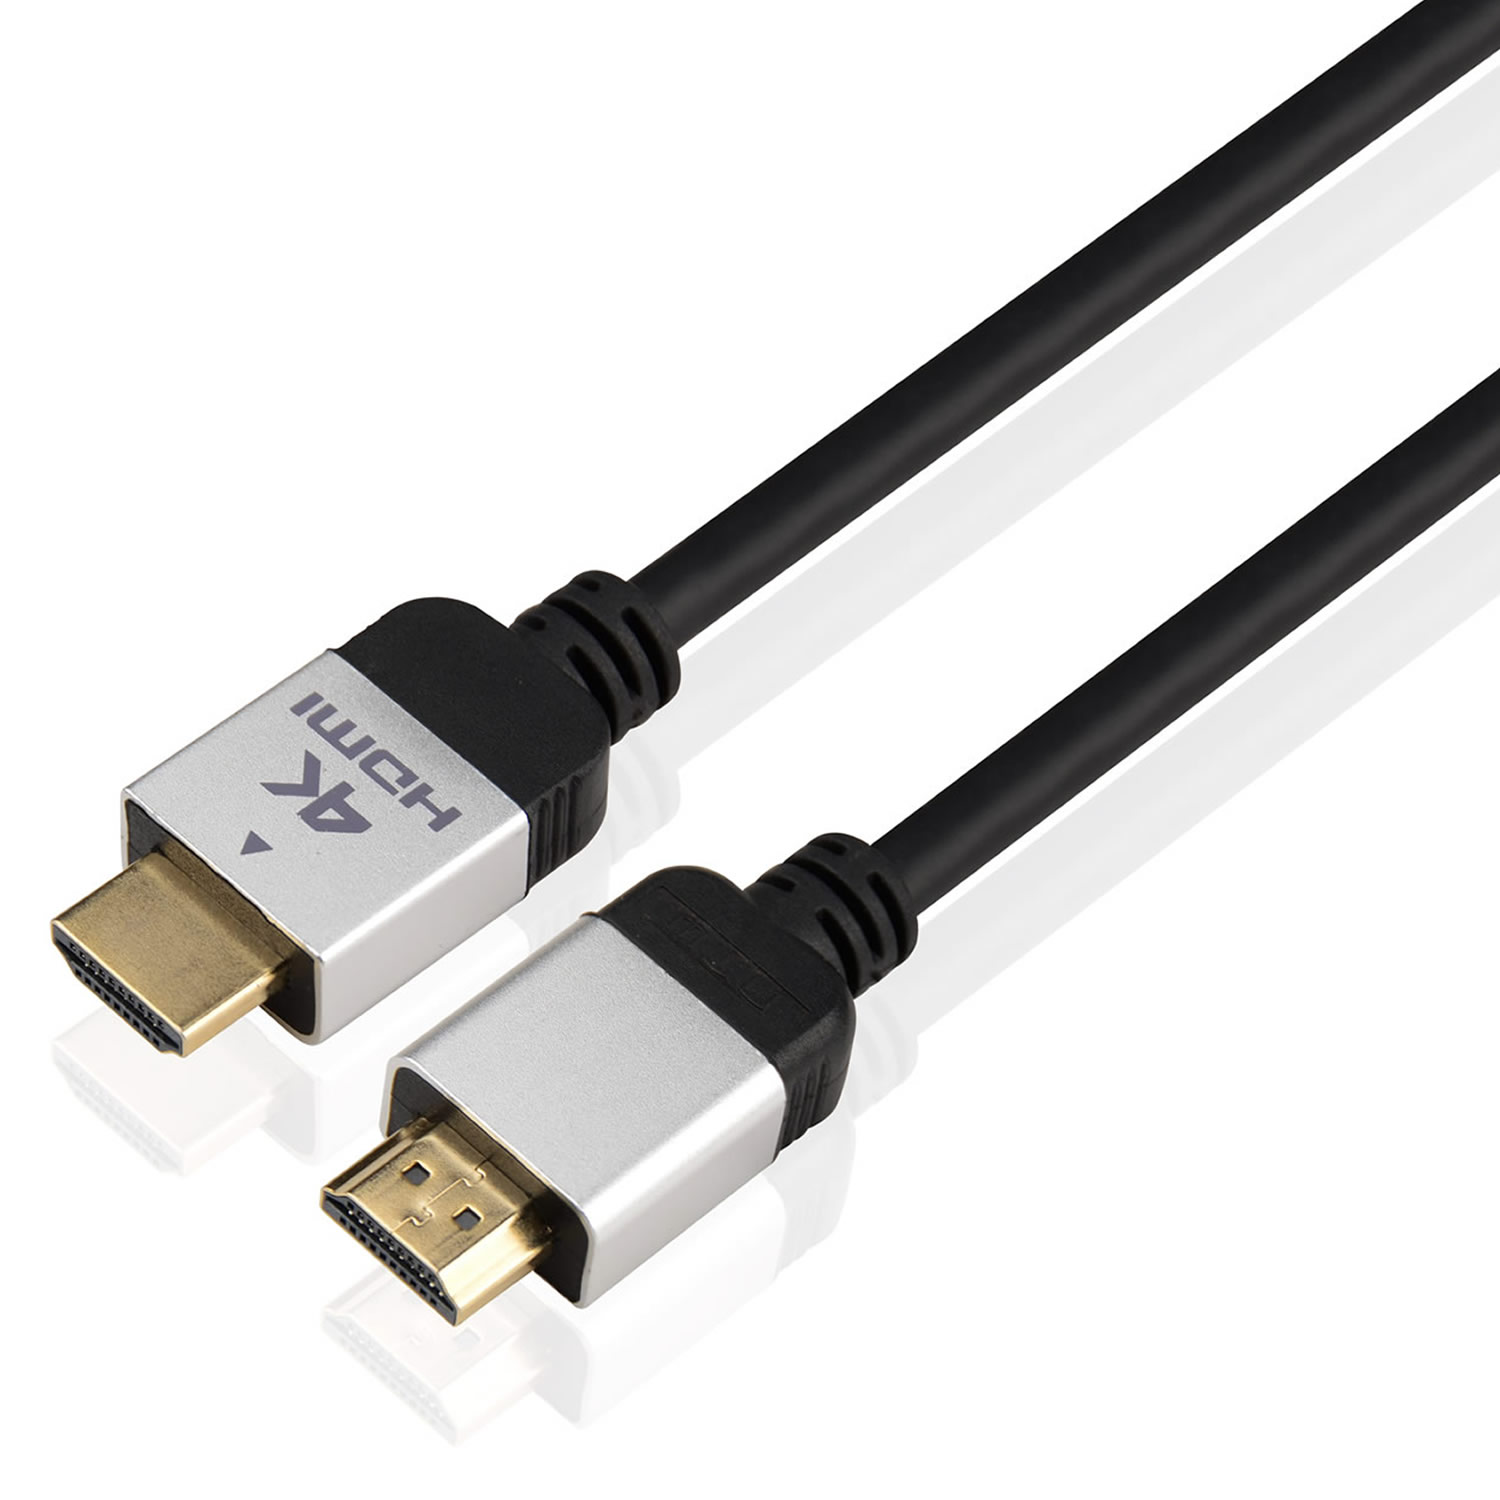 6' Ultra HD PURE PLUS 4K High Speed HDMI Cable With Ethernet